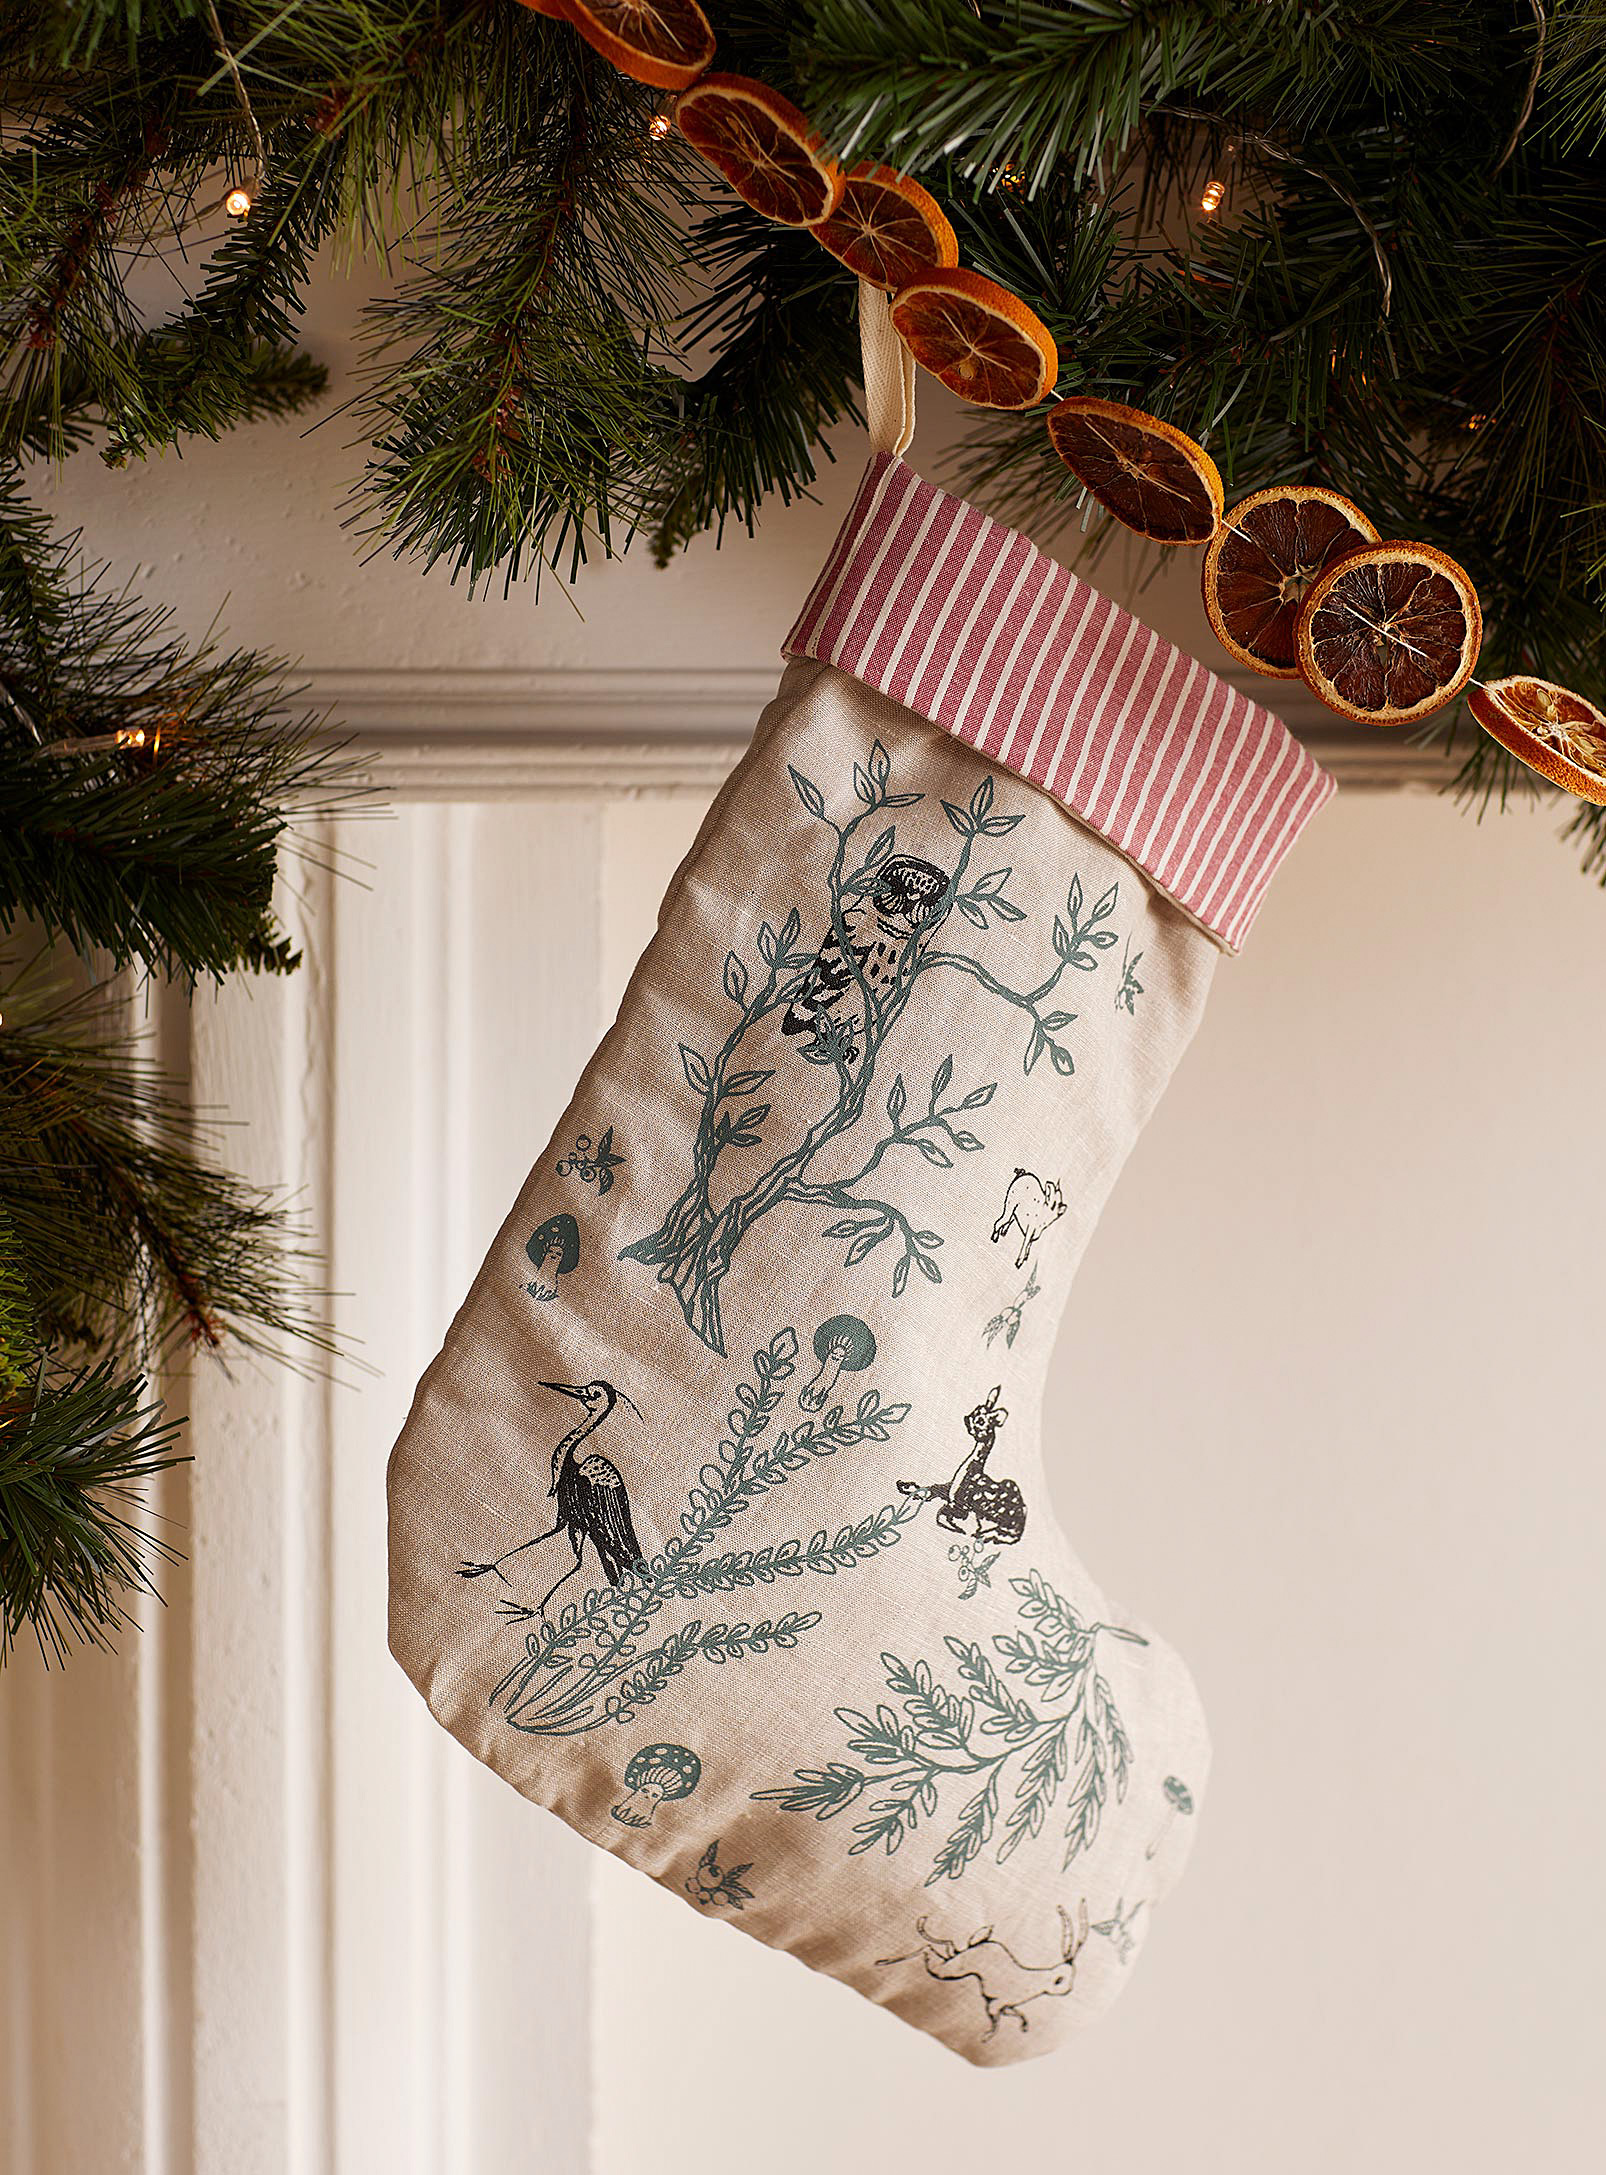 La fée raille - Country-style pattern Christmas stocking